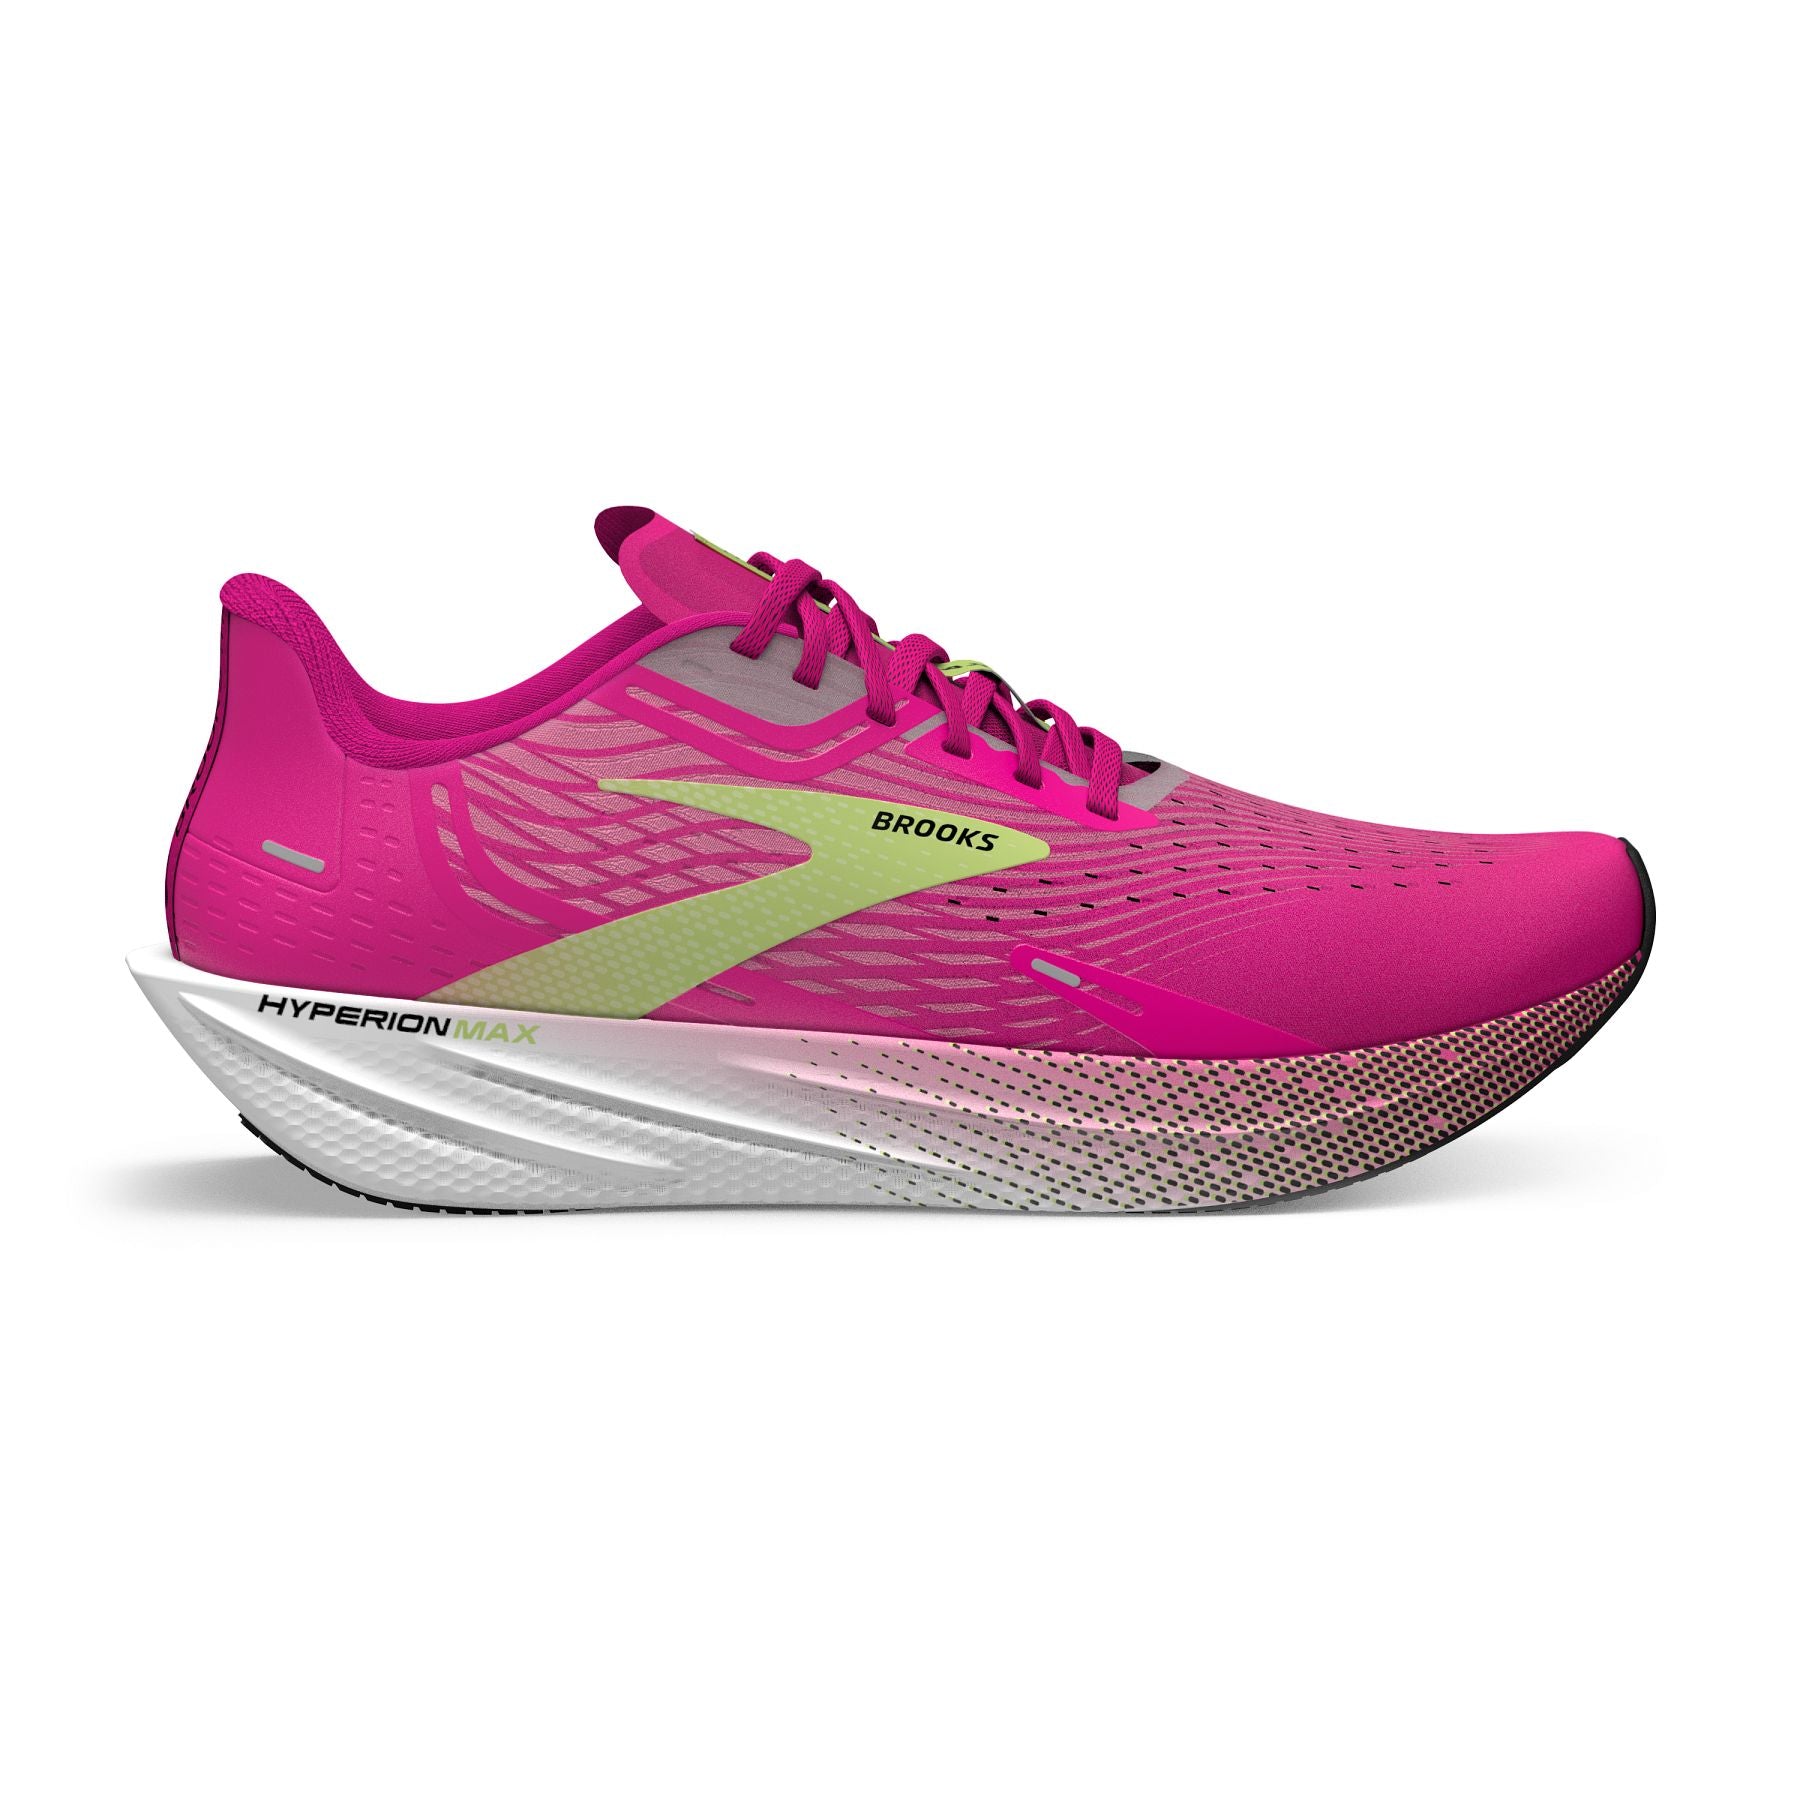 Lateral view of the Women's Hyperion Max by Brook's in the color Pink Glo/Green/Black